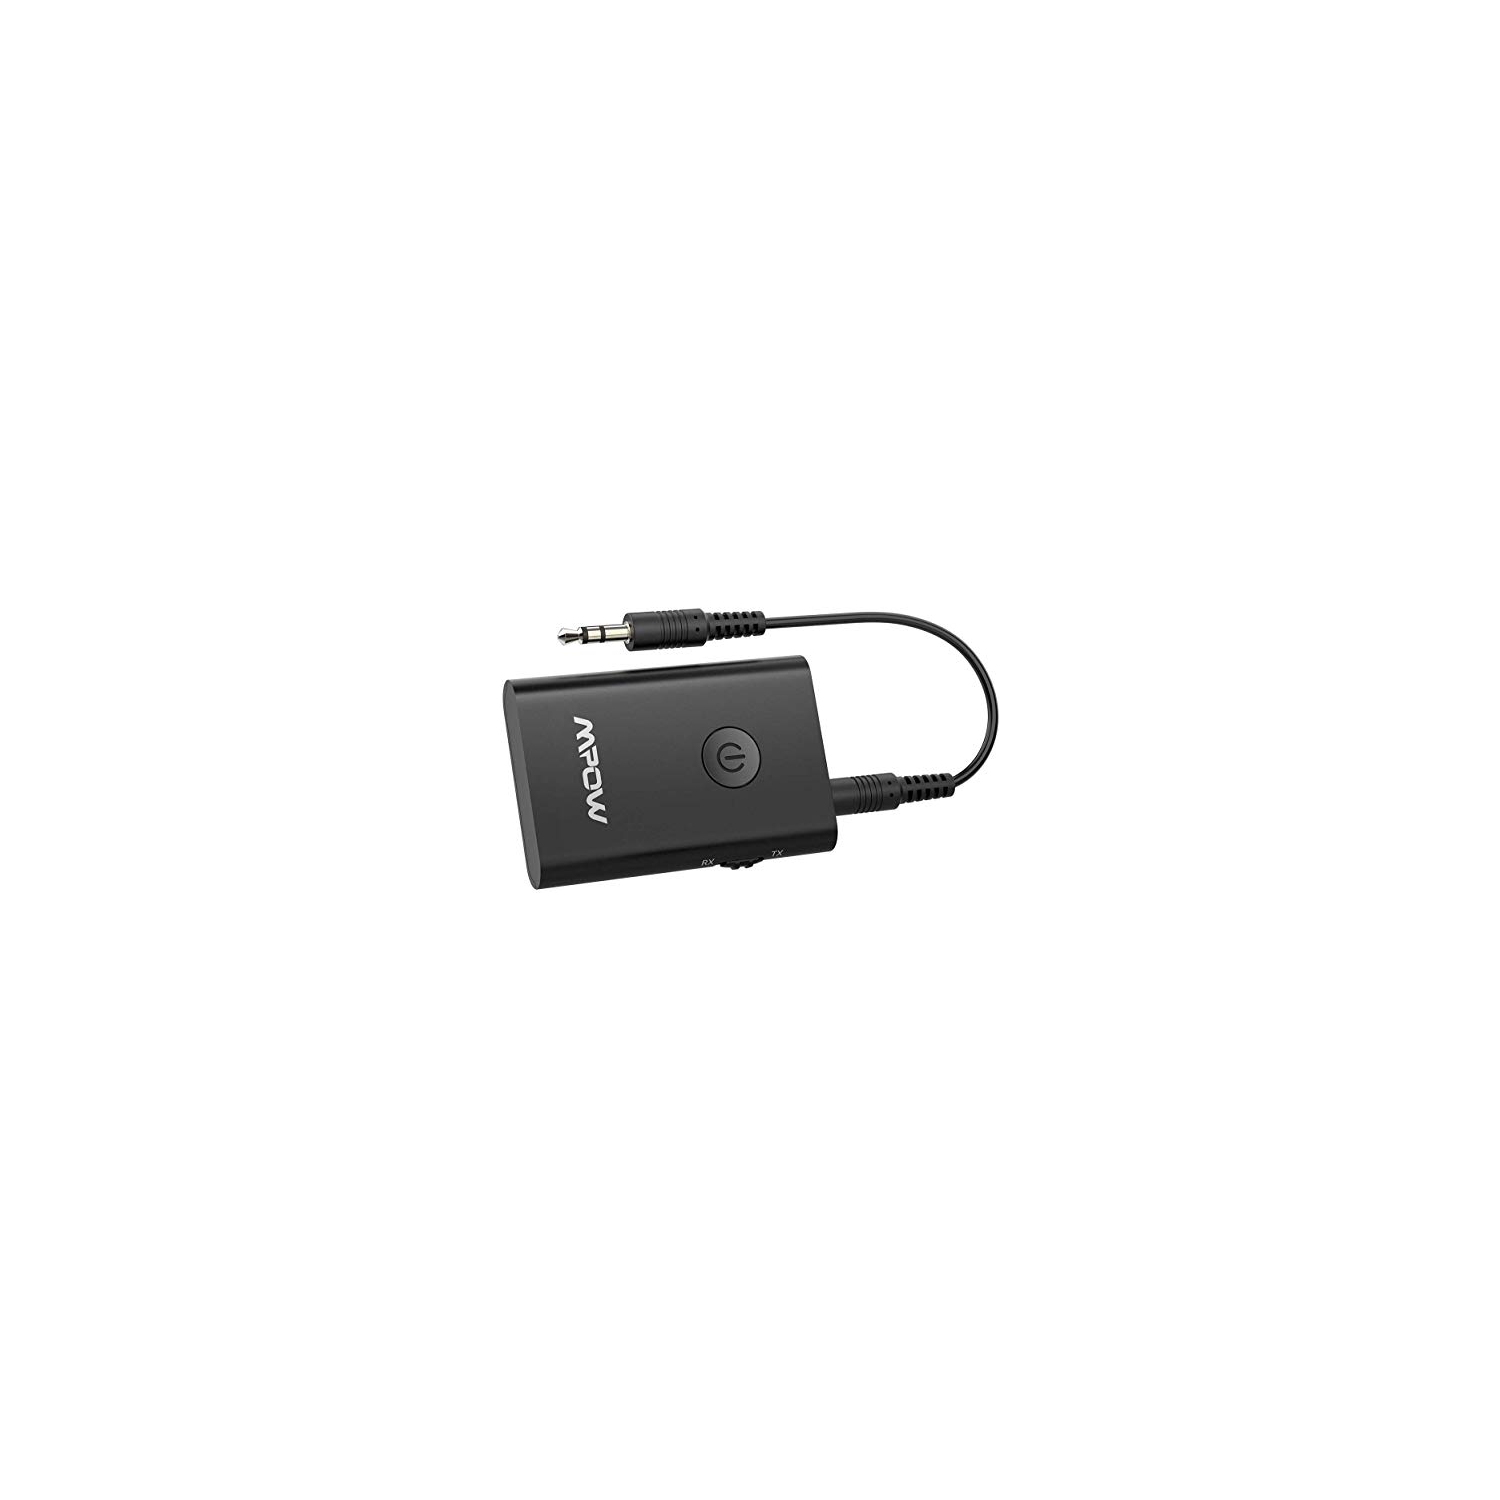 Mpow Bluetooth 5.0 Transmitter and Receiver, 2-in-1 Wireless Bluetooth Adapter, Bluetooth Transmitter for TV, Bluetooth